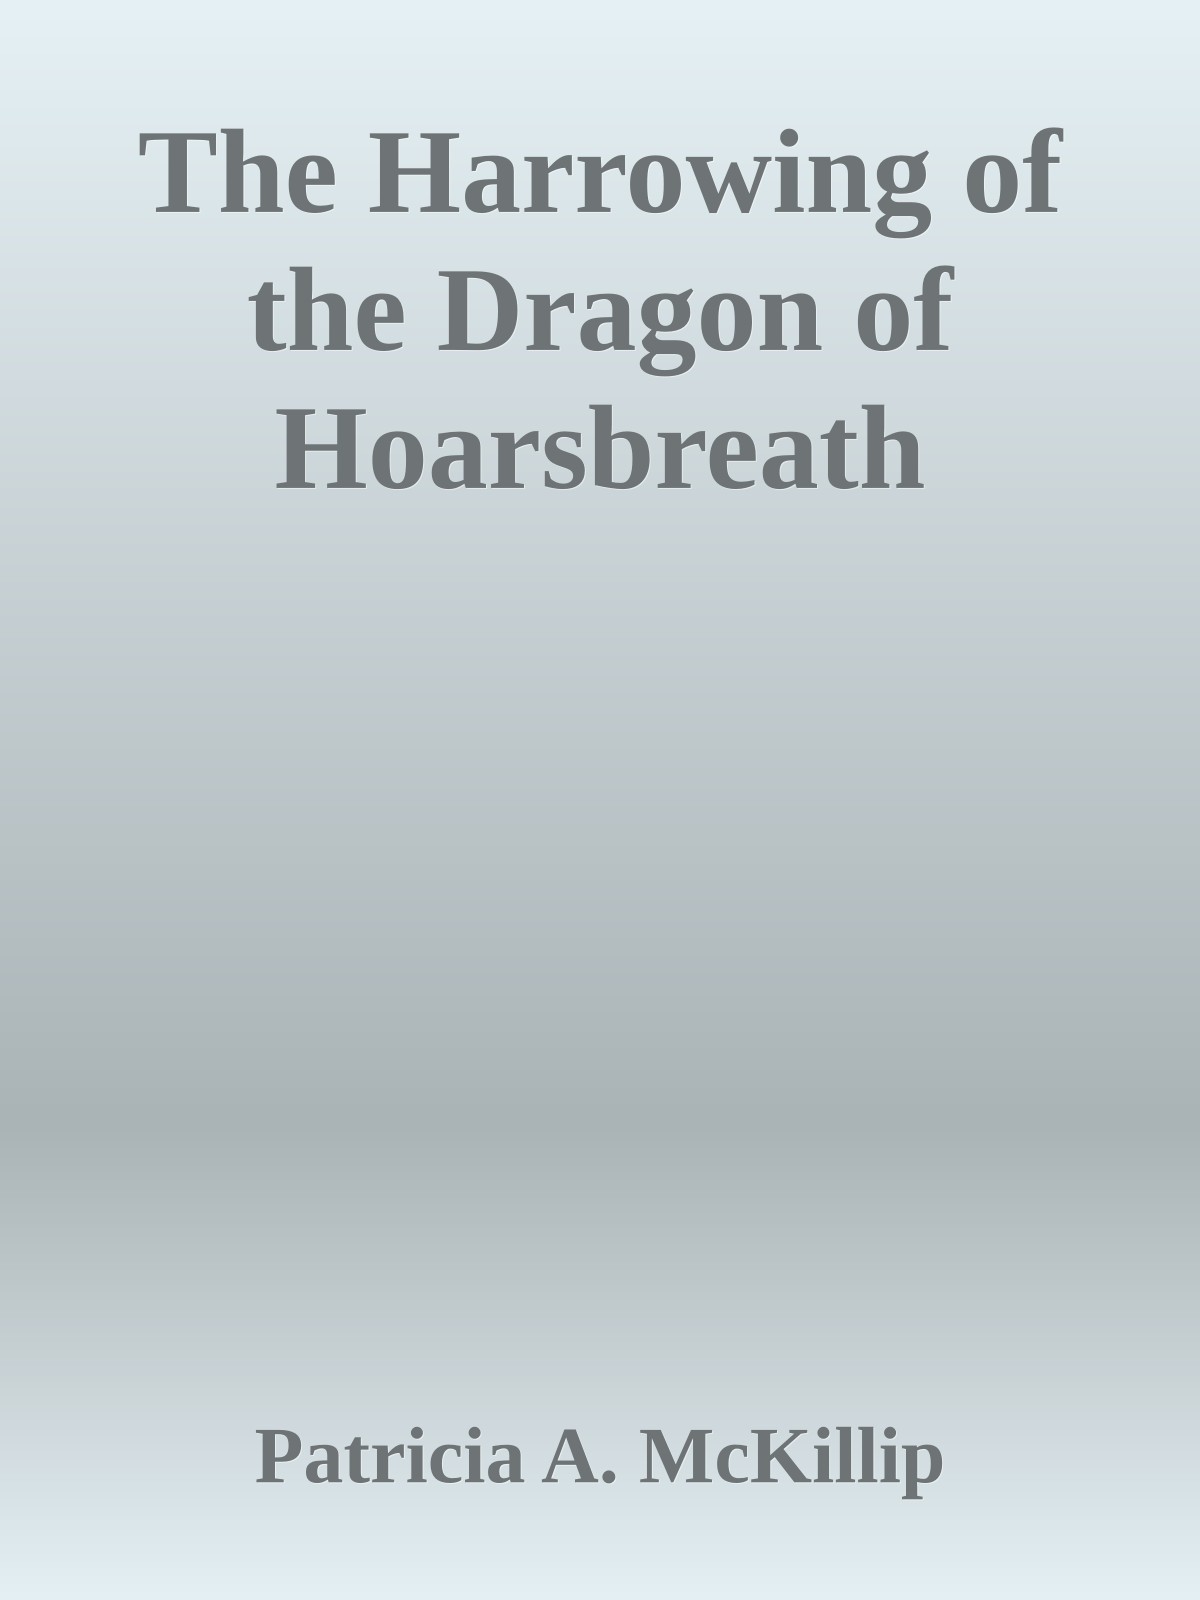 The Harrowing of the Dragon of Hoarsbreath